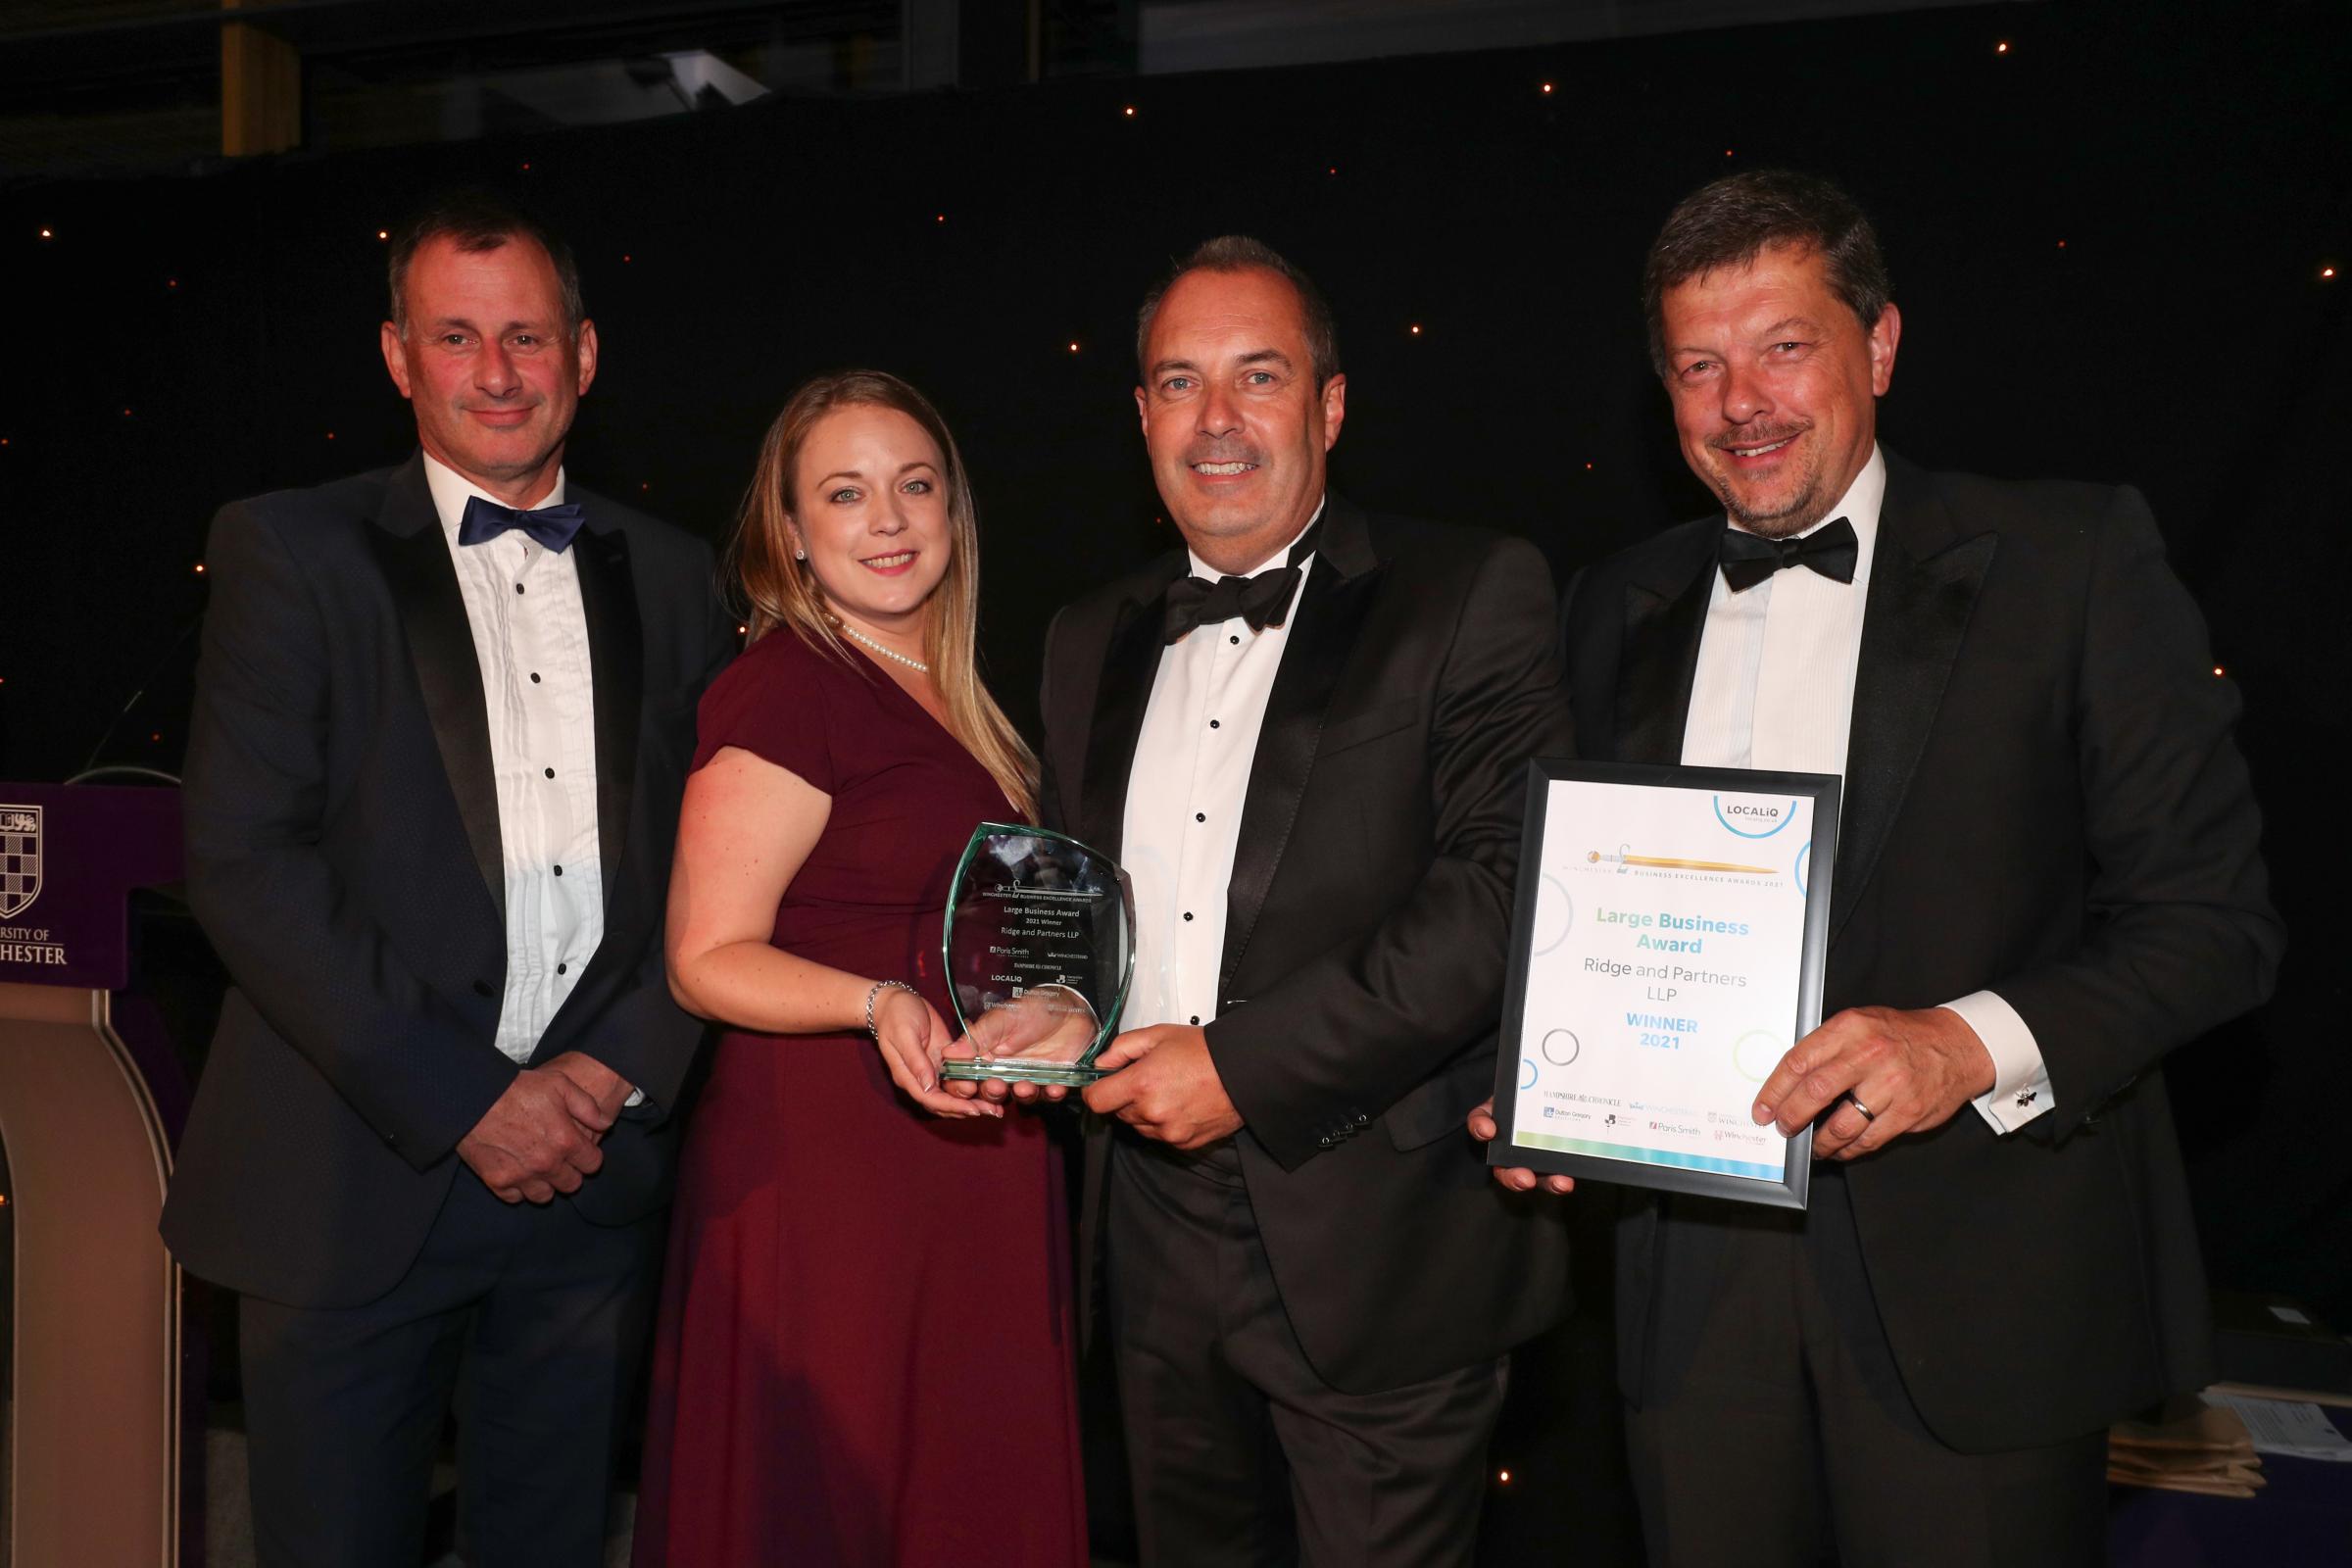 Winchester Business Excellence Awards 2021. Winner of the Large Business Award Ridge and Partners LLP.